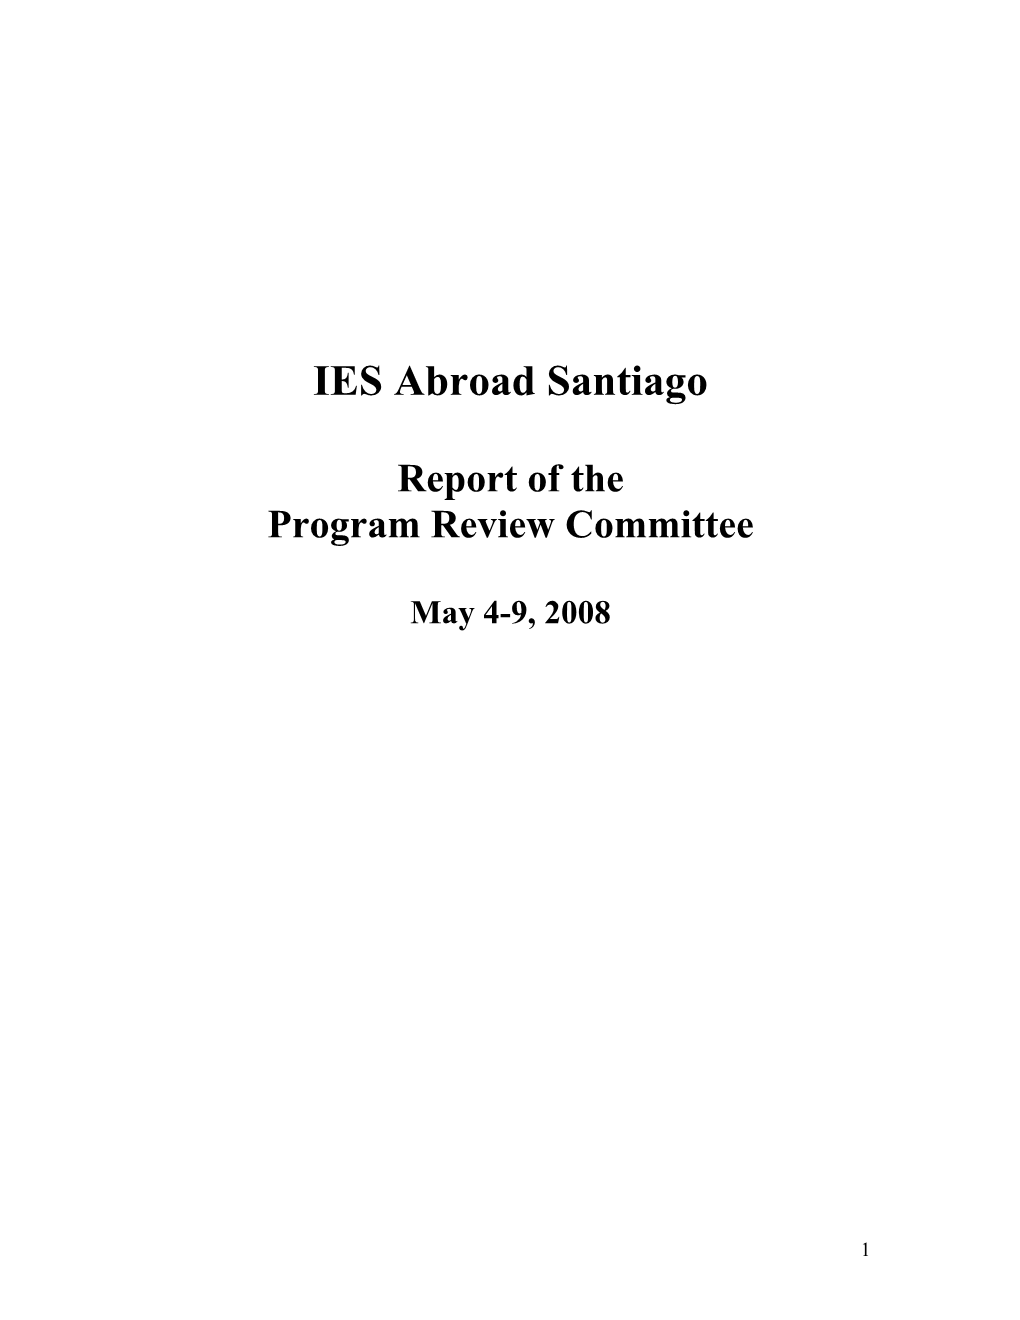 2008 Review of the IES Program in Santiago, Chile